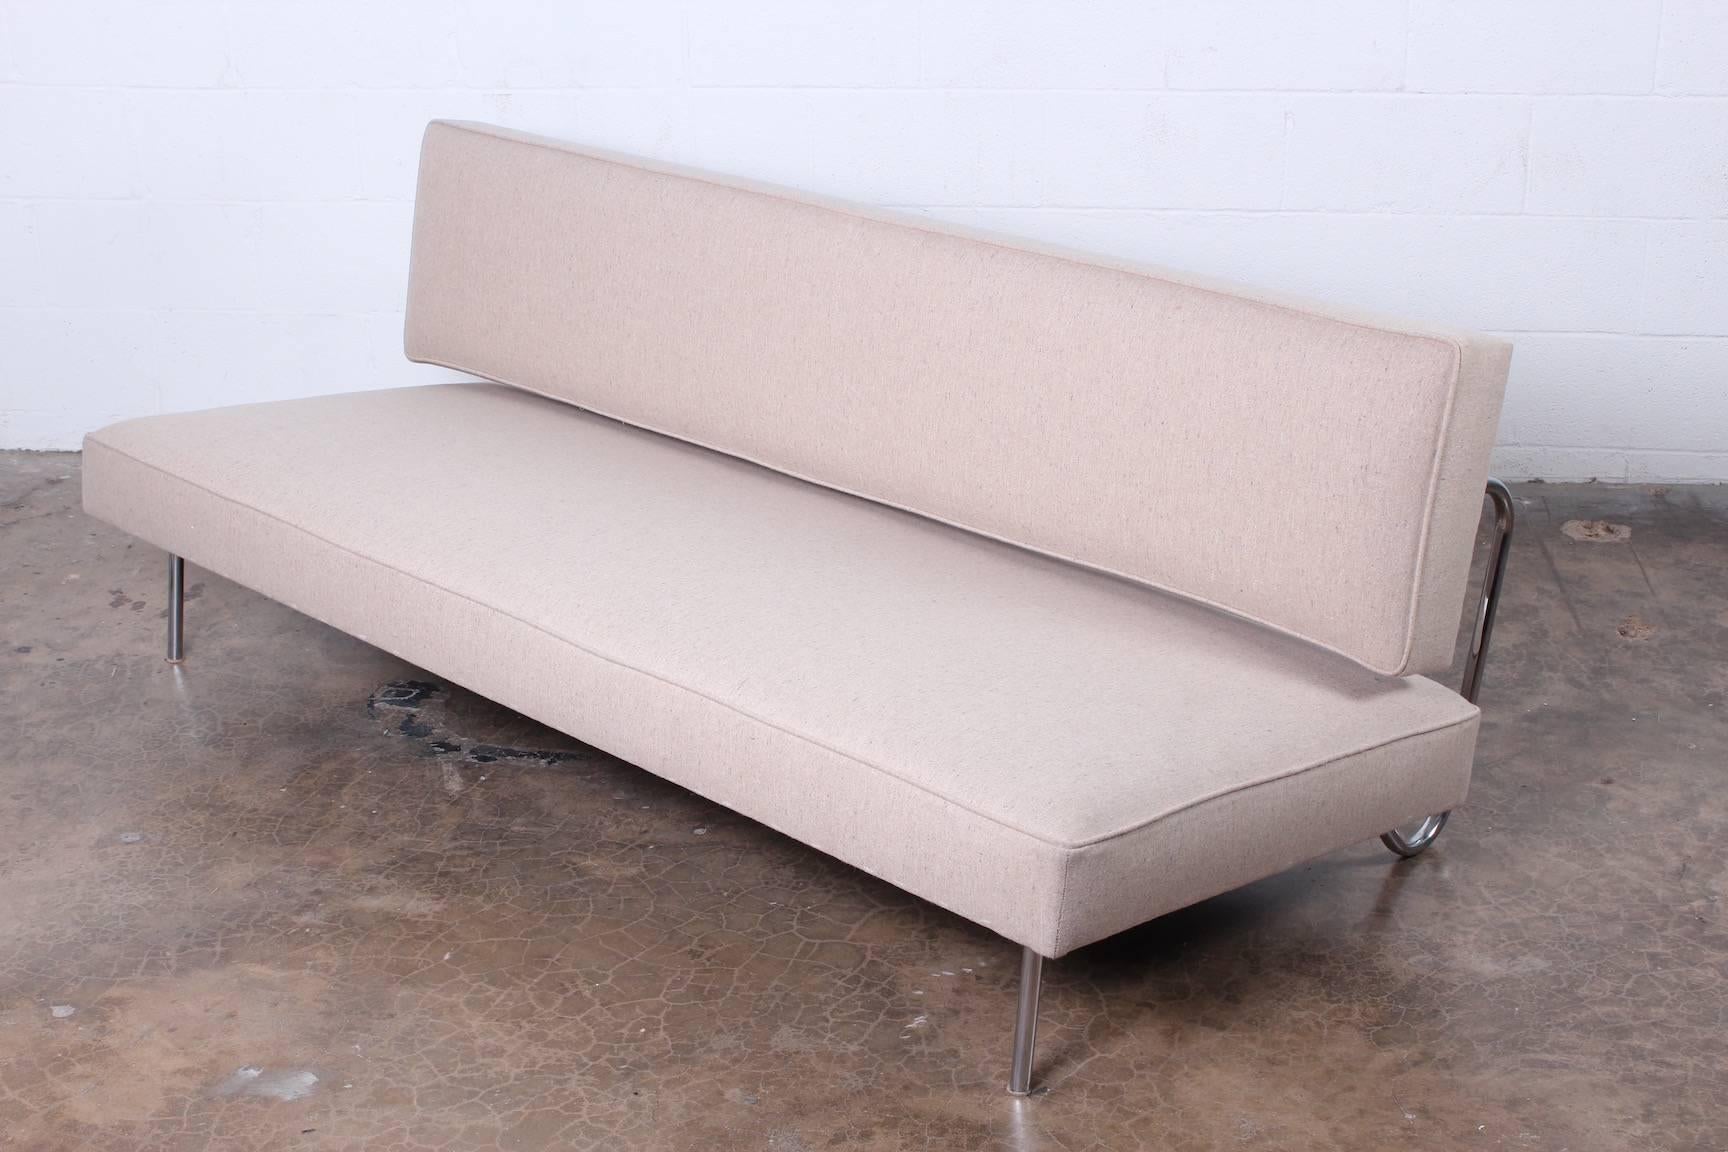 A sofa that converts to a bed designed by Ernst Ambühler, 1957 for Teo Jakob.